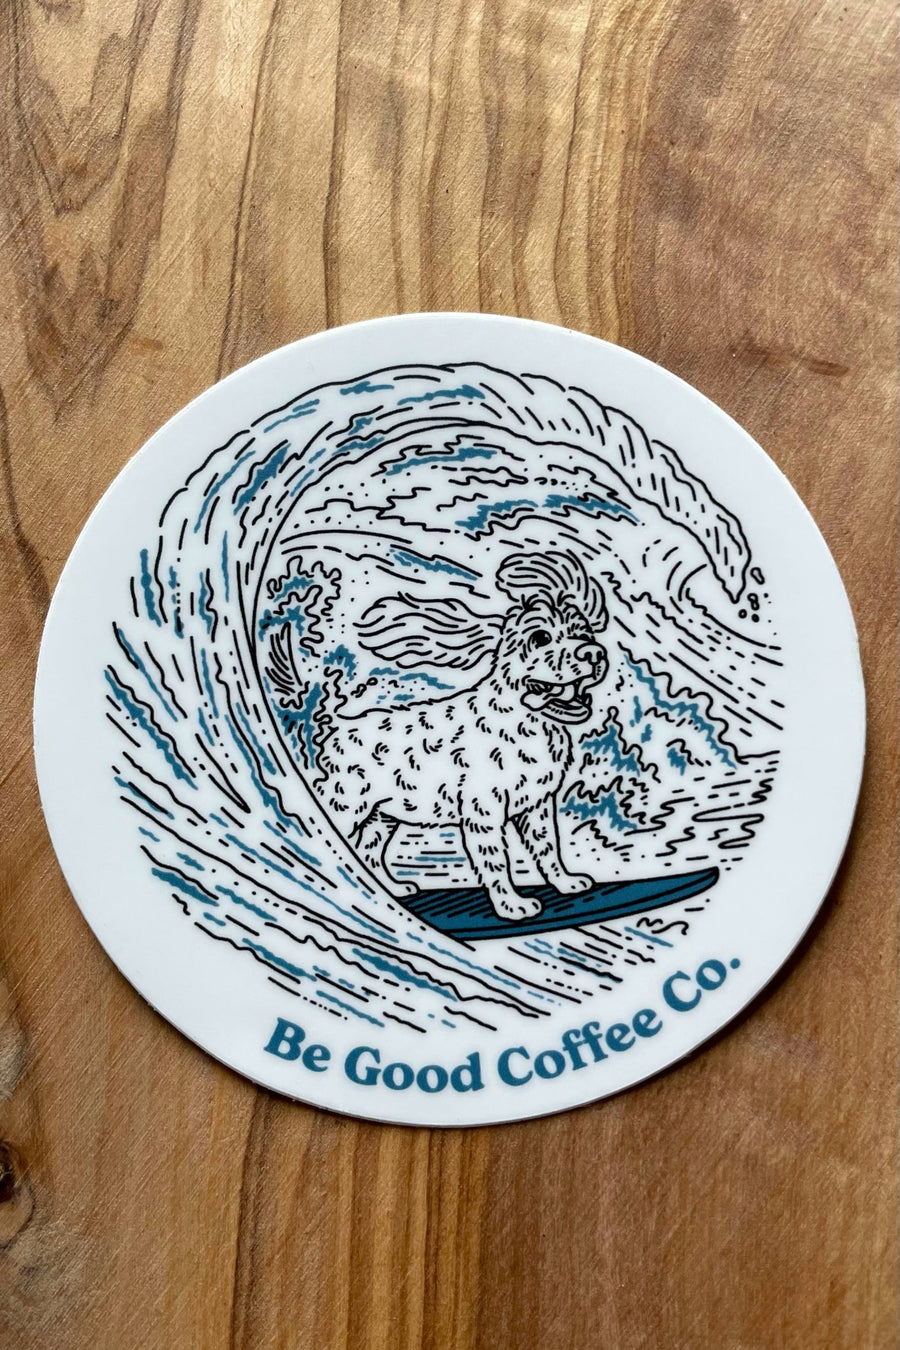 Be Good Coffee Co. Sticker - Be Good Coffee Co.